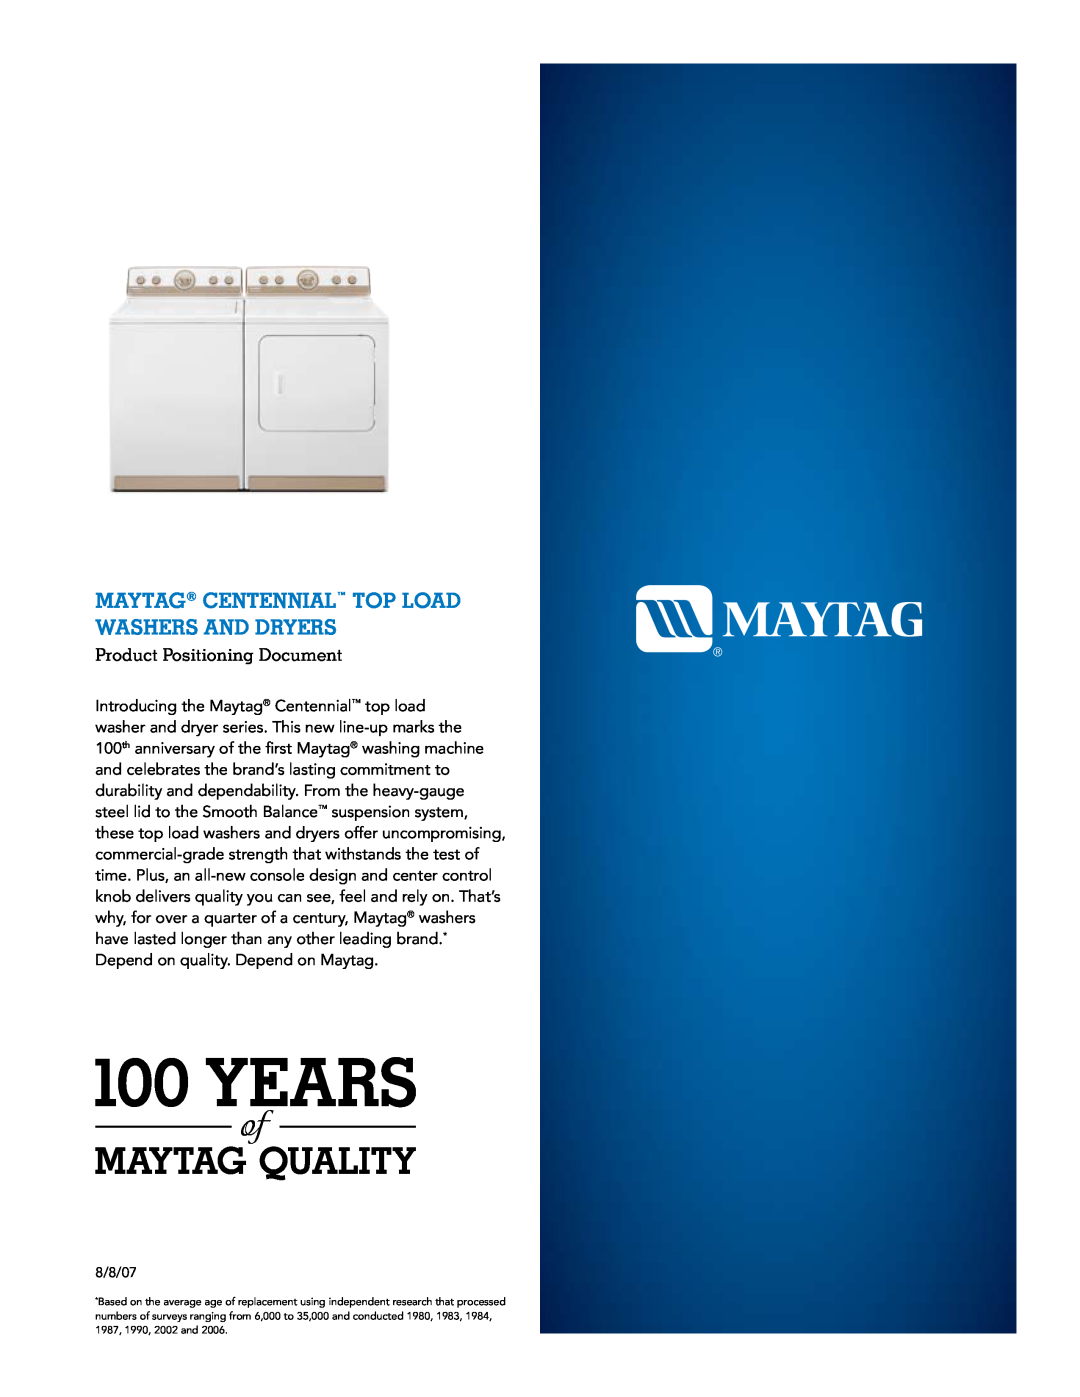 Maytag MED, MGD5600T manual maytag CENTENNIAL Top Load Washers and Dryers, Product Positioning Document 